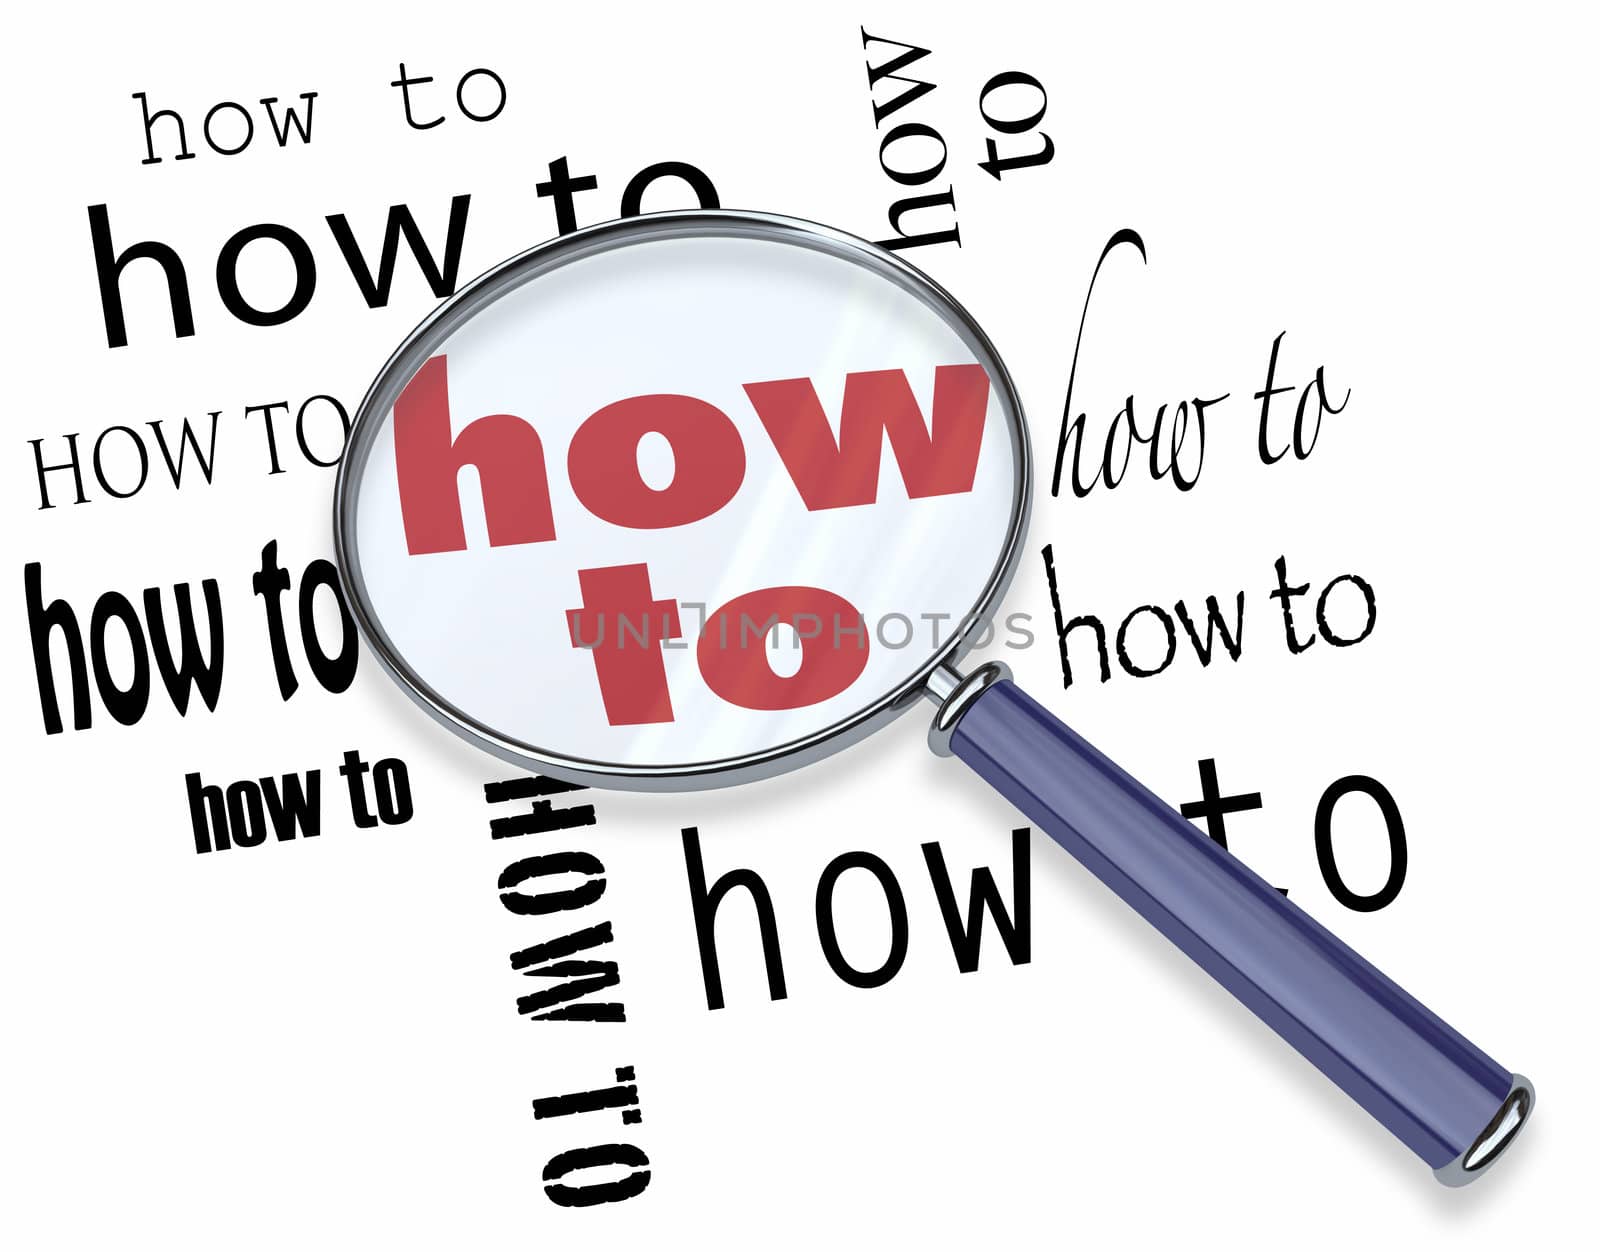 The words How To found by a magnifying glass symbolizing the research for finding instructions on performing a task or working on a difficult project